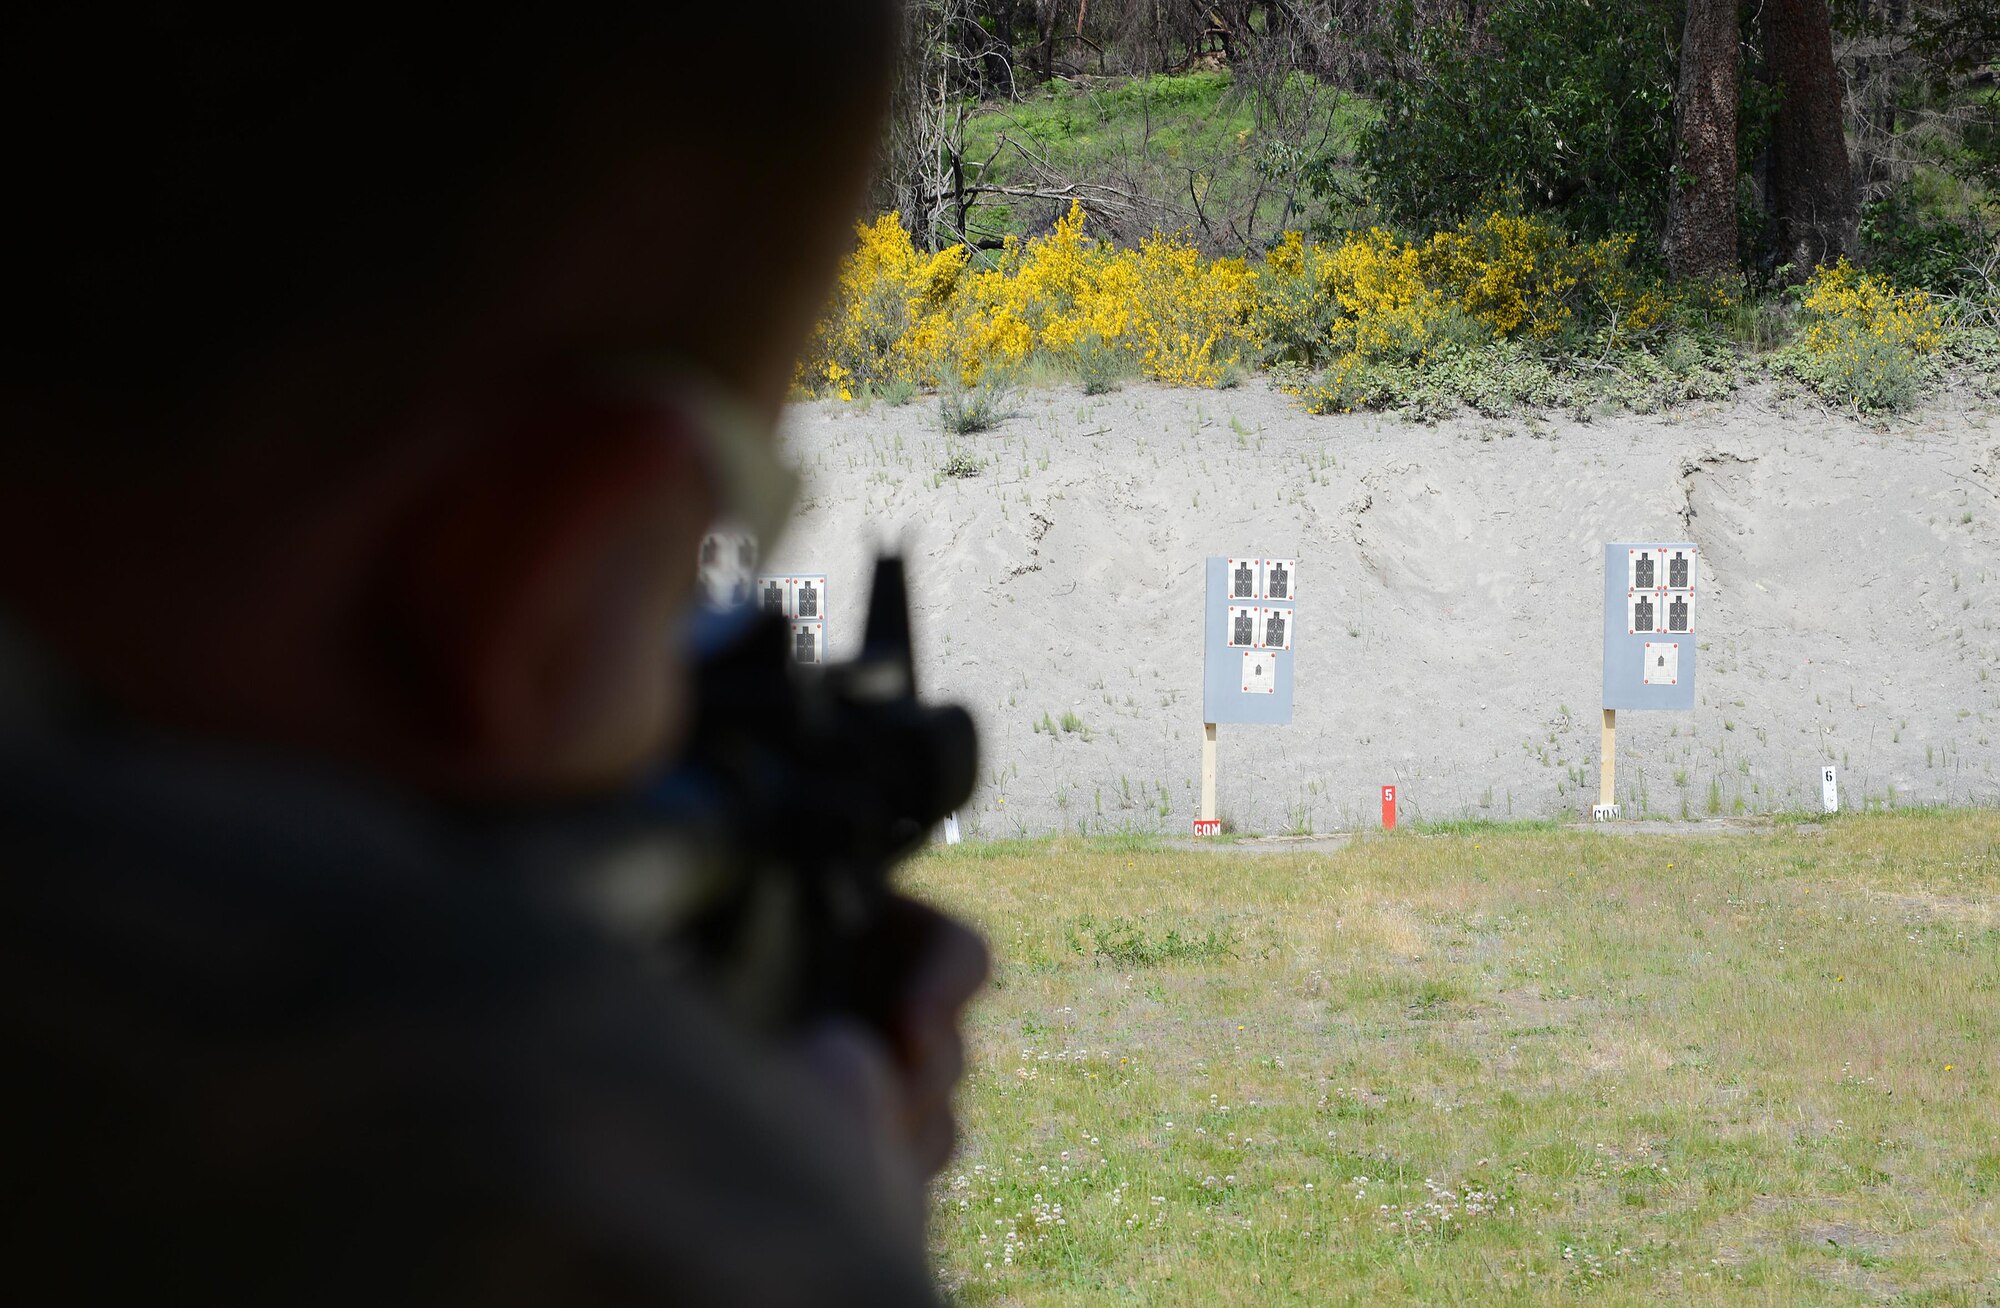 Staff Sgt. Blake McCartney, 627th Security Forces Squadron command support staff, aims an M-4 Carbine rifle at a target May 31, 2017, during the Elementary Level Rifle Excellence Competition at Joint Base Lewis-McChord, Wash. More than 100 Airmen from JBLM competed in the competition for the U.S. Air Force Excellence in Competition Rifleman Badge. (U.S. Air Force photo/Senior Airman Jacob Jimenez)  